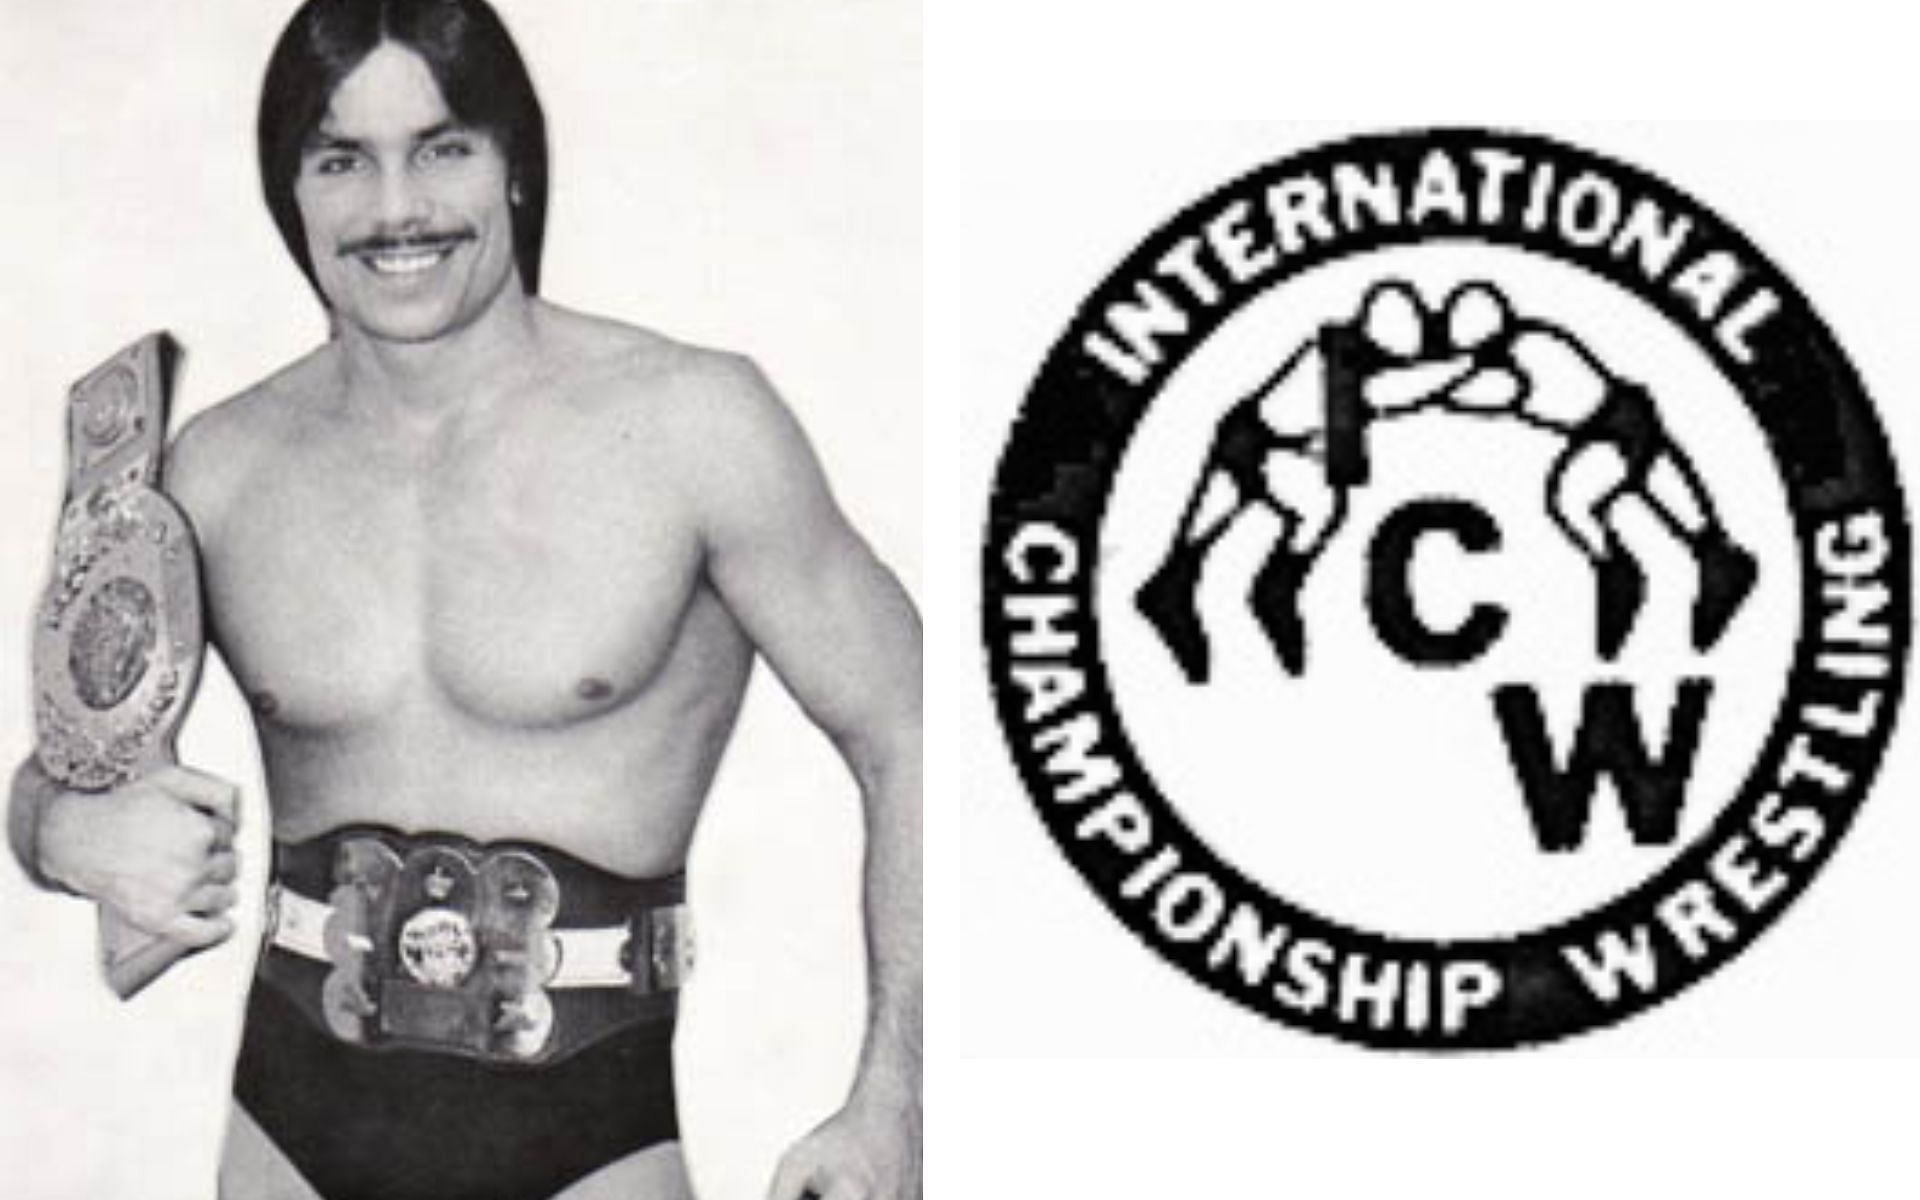 Lanny Poffo was the main star for ICW during their 6-year run.